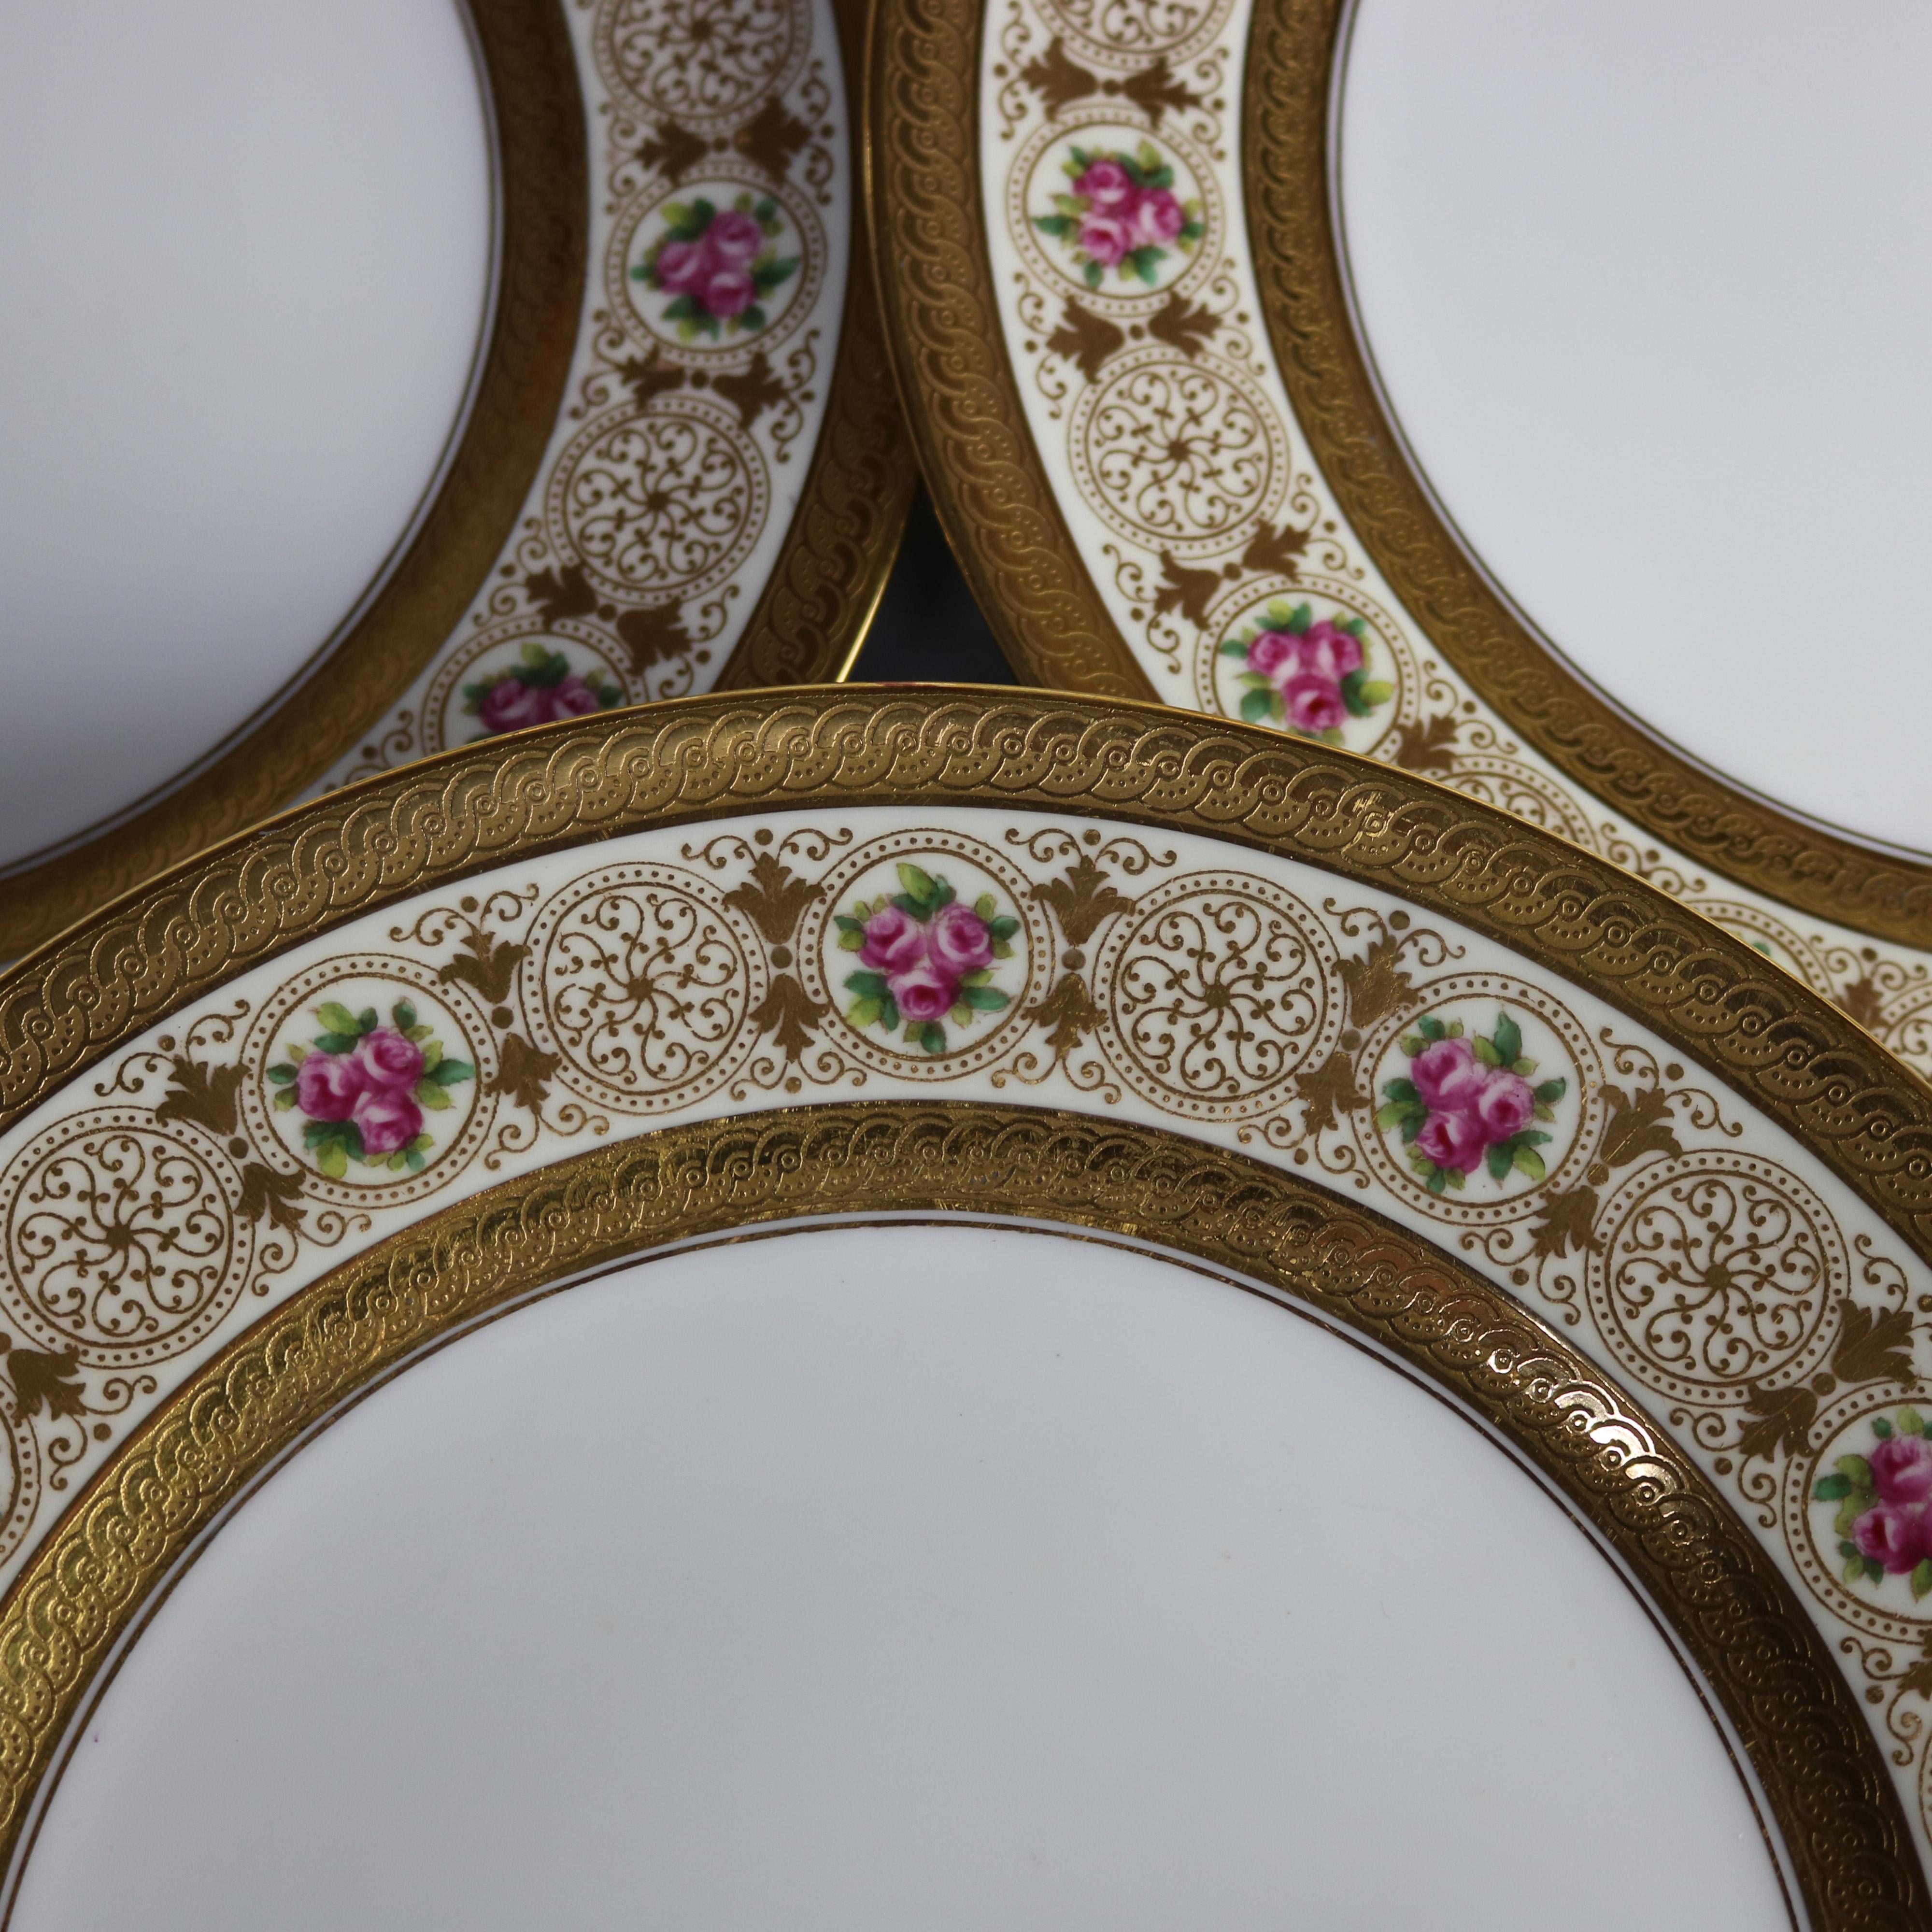 Porcelain Eleven English Cauldon Hand Painted & Gilt Decorated Dinner Plates, 20th Century